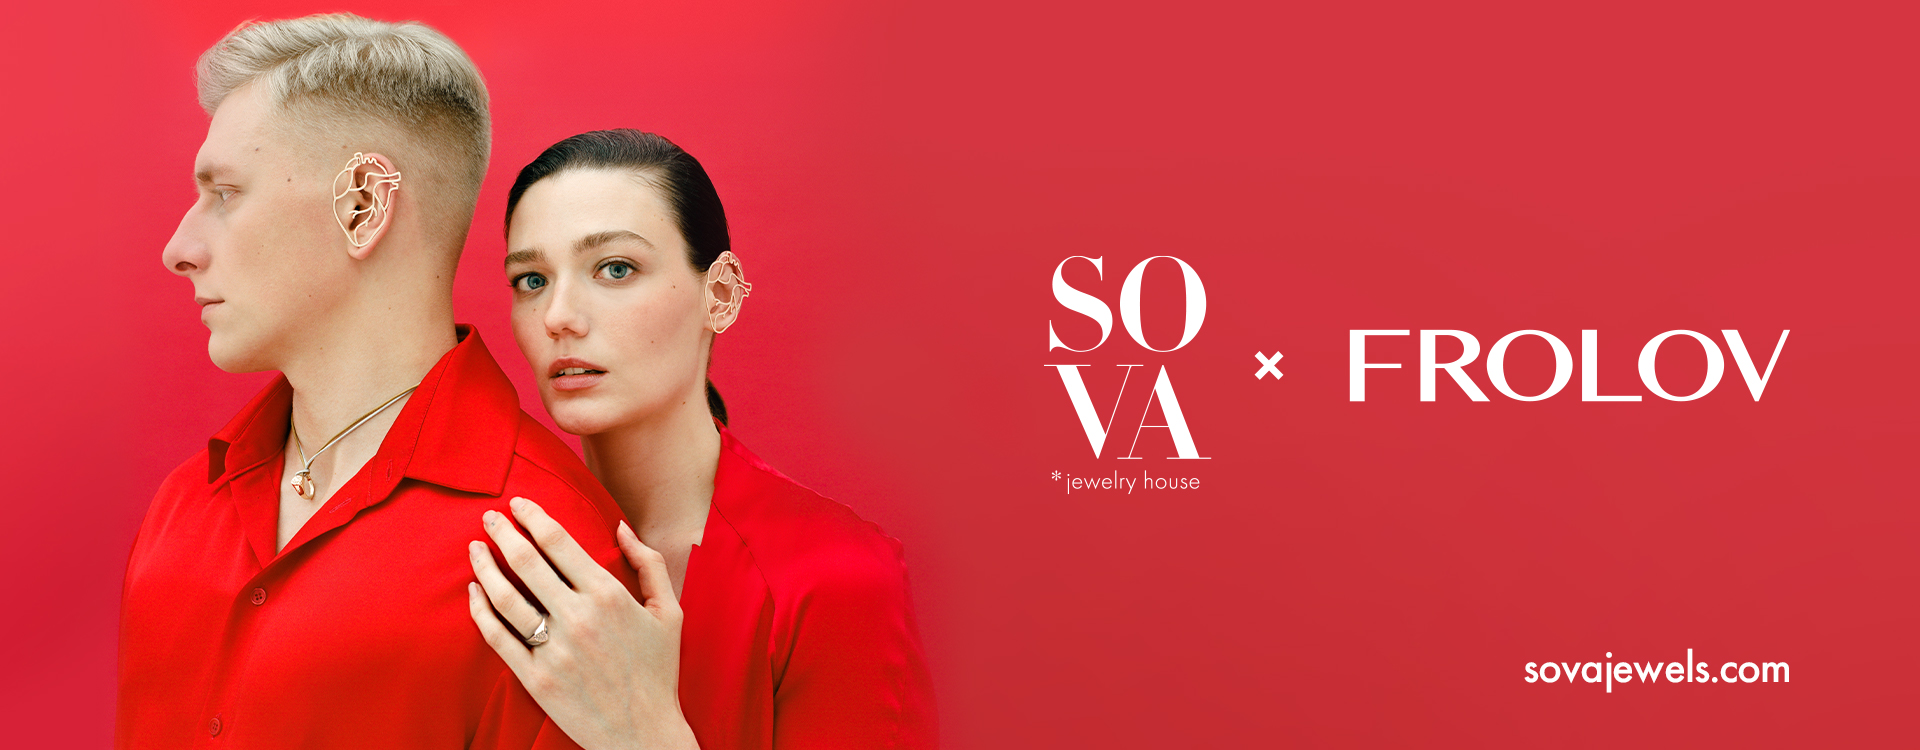 SOVA x FROLOV: a new collaboration that saves lives